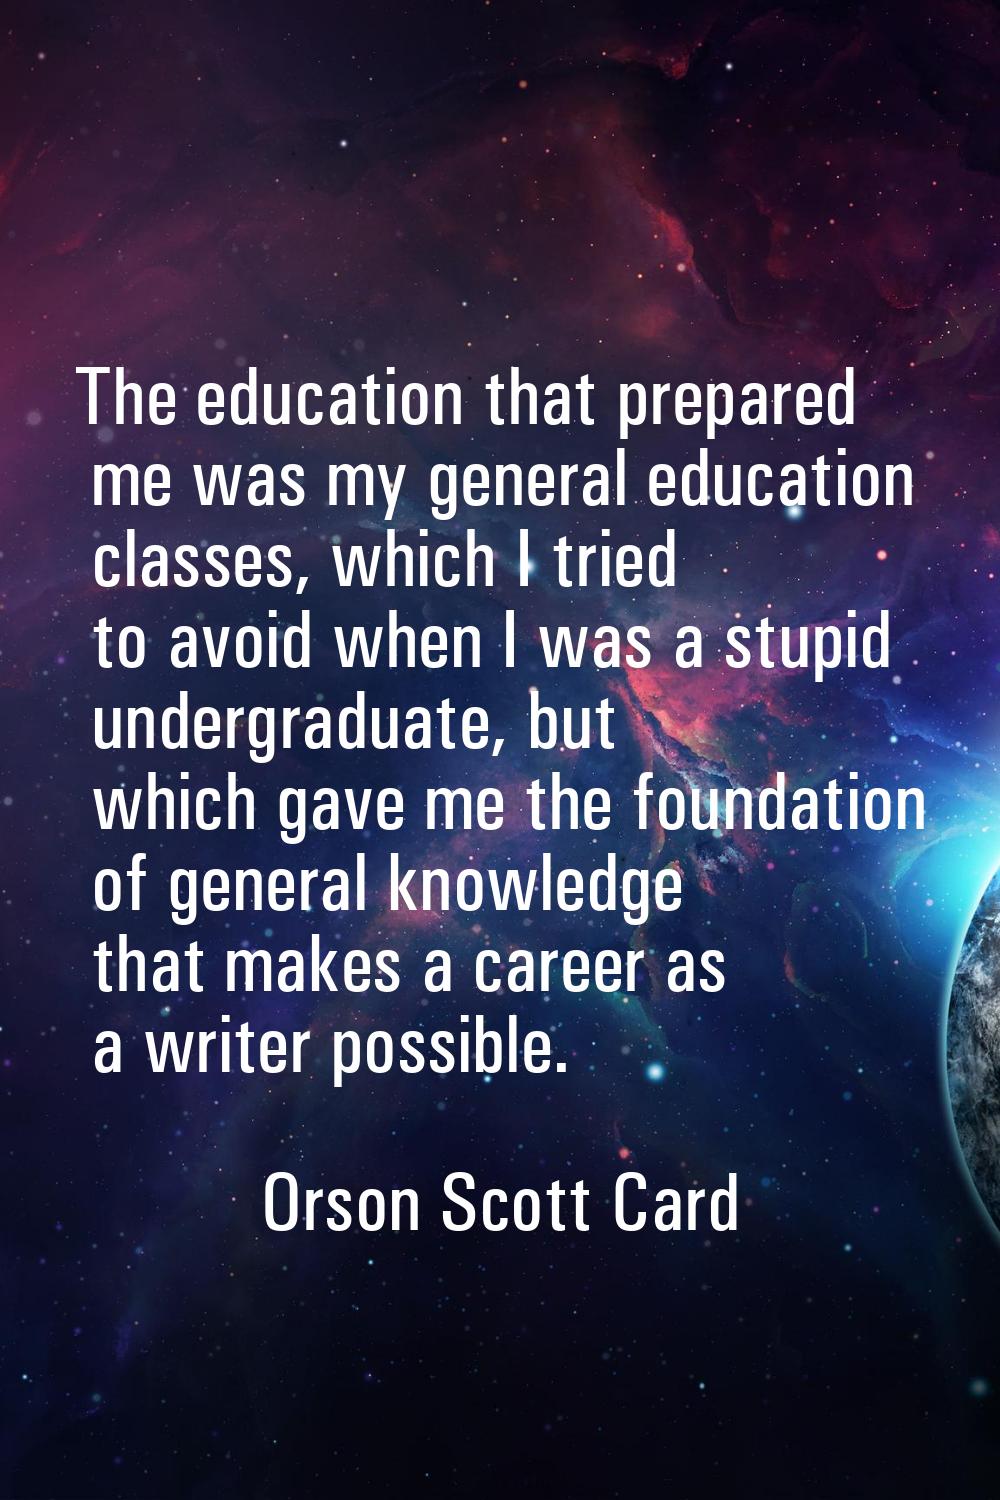 The education that prepared me was my general education classes, which I tried to avoid when I was 